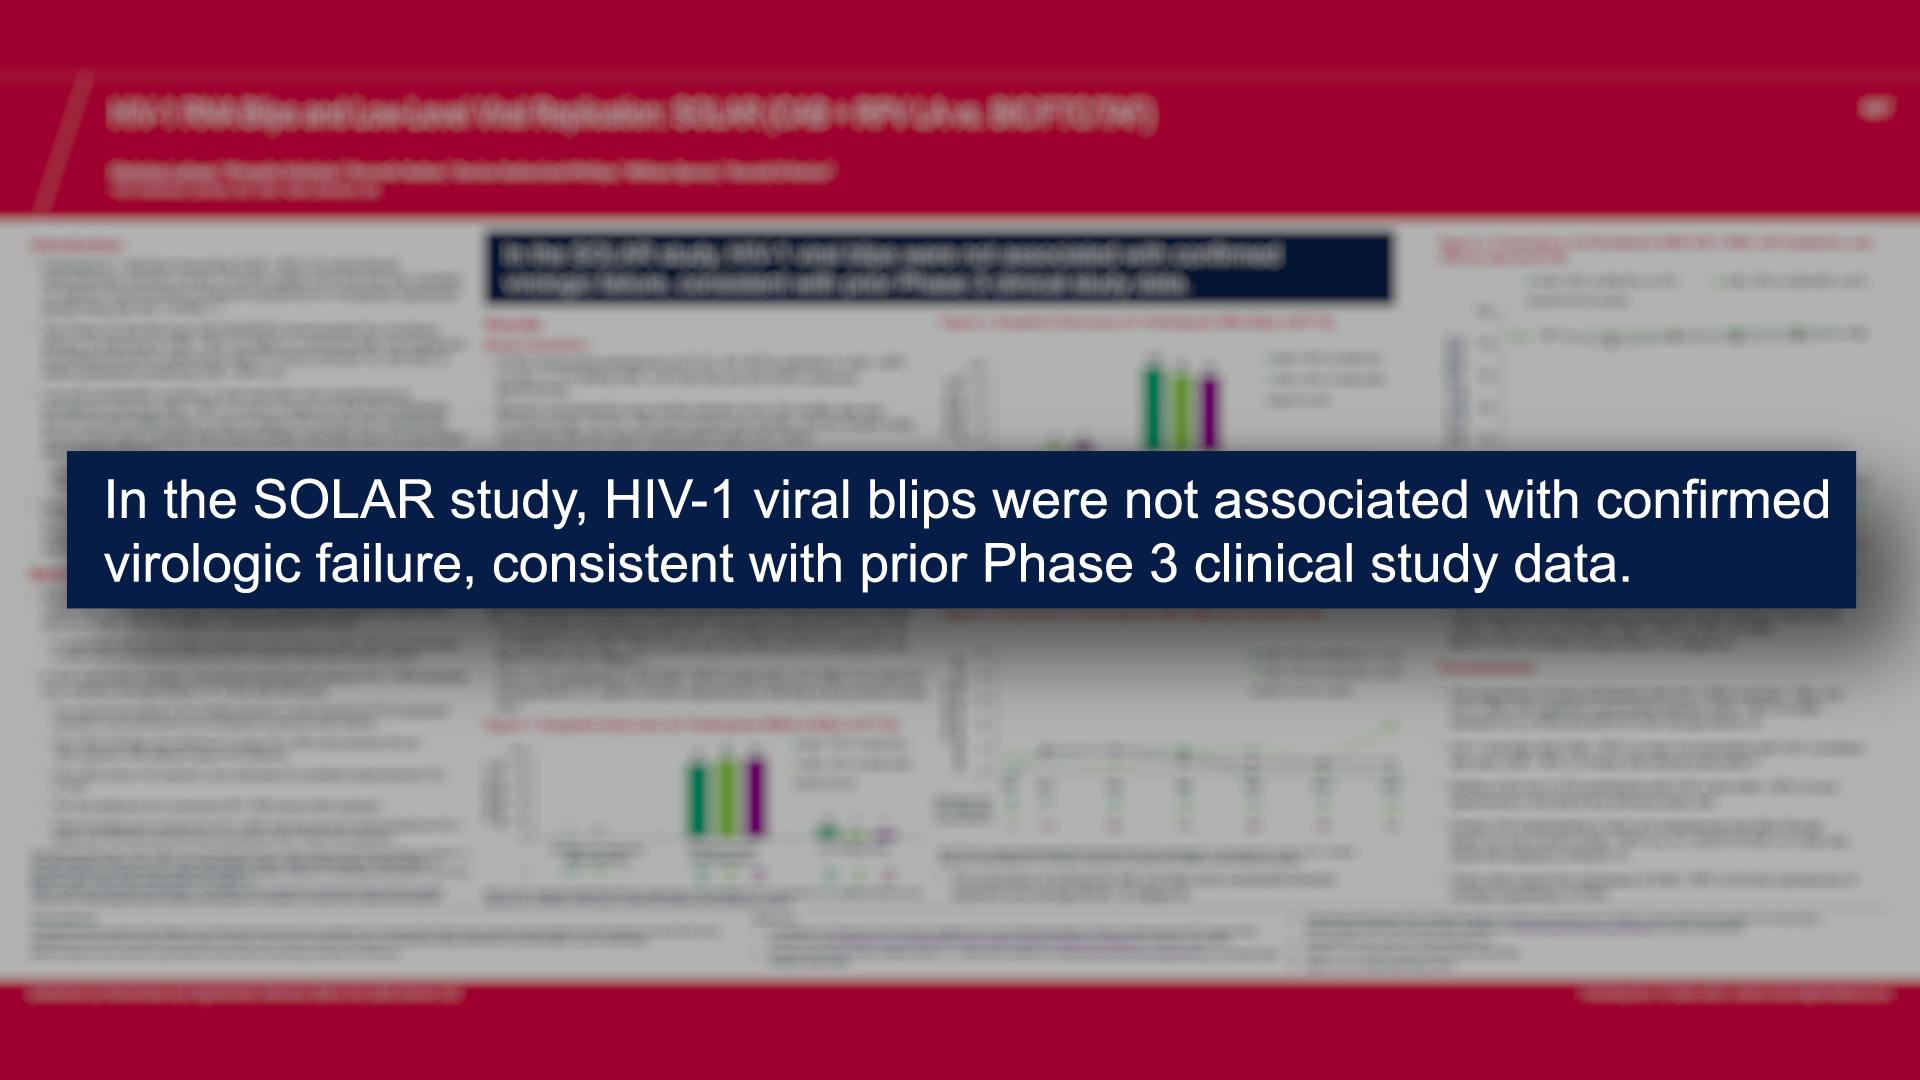 In the SOLAR study, HIV-1 viral blips were not associated with confirmed virologic failure, consistent with prior Phase 3 clinical study data